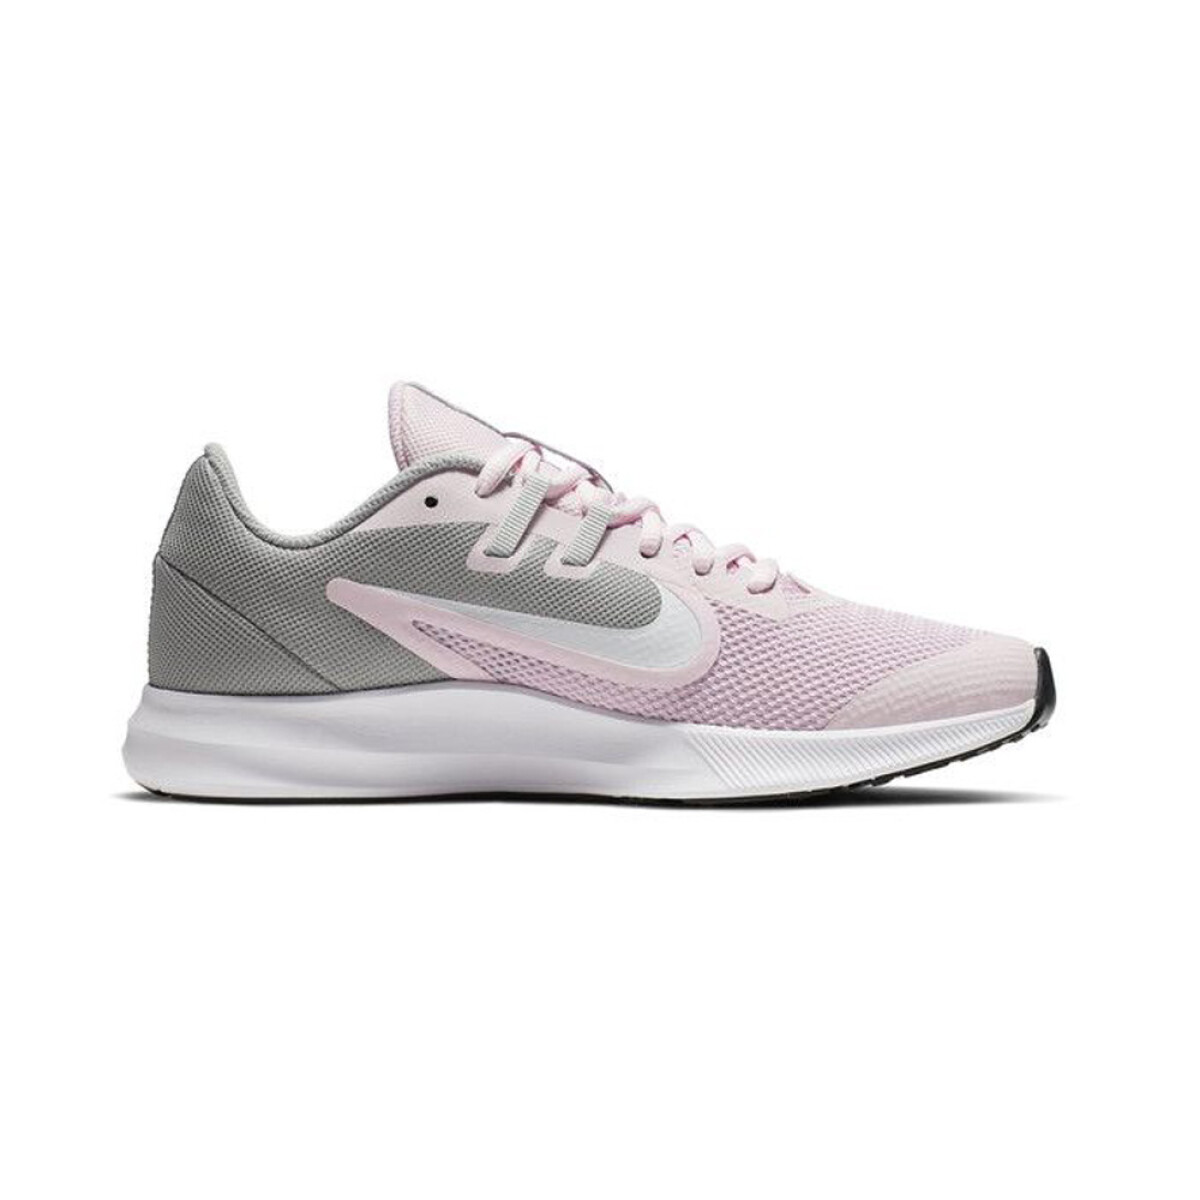 Nike Downshifter 9 GS - Pink 